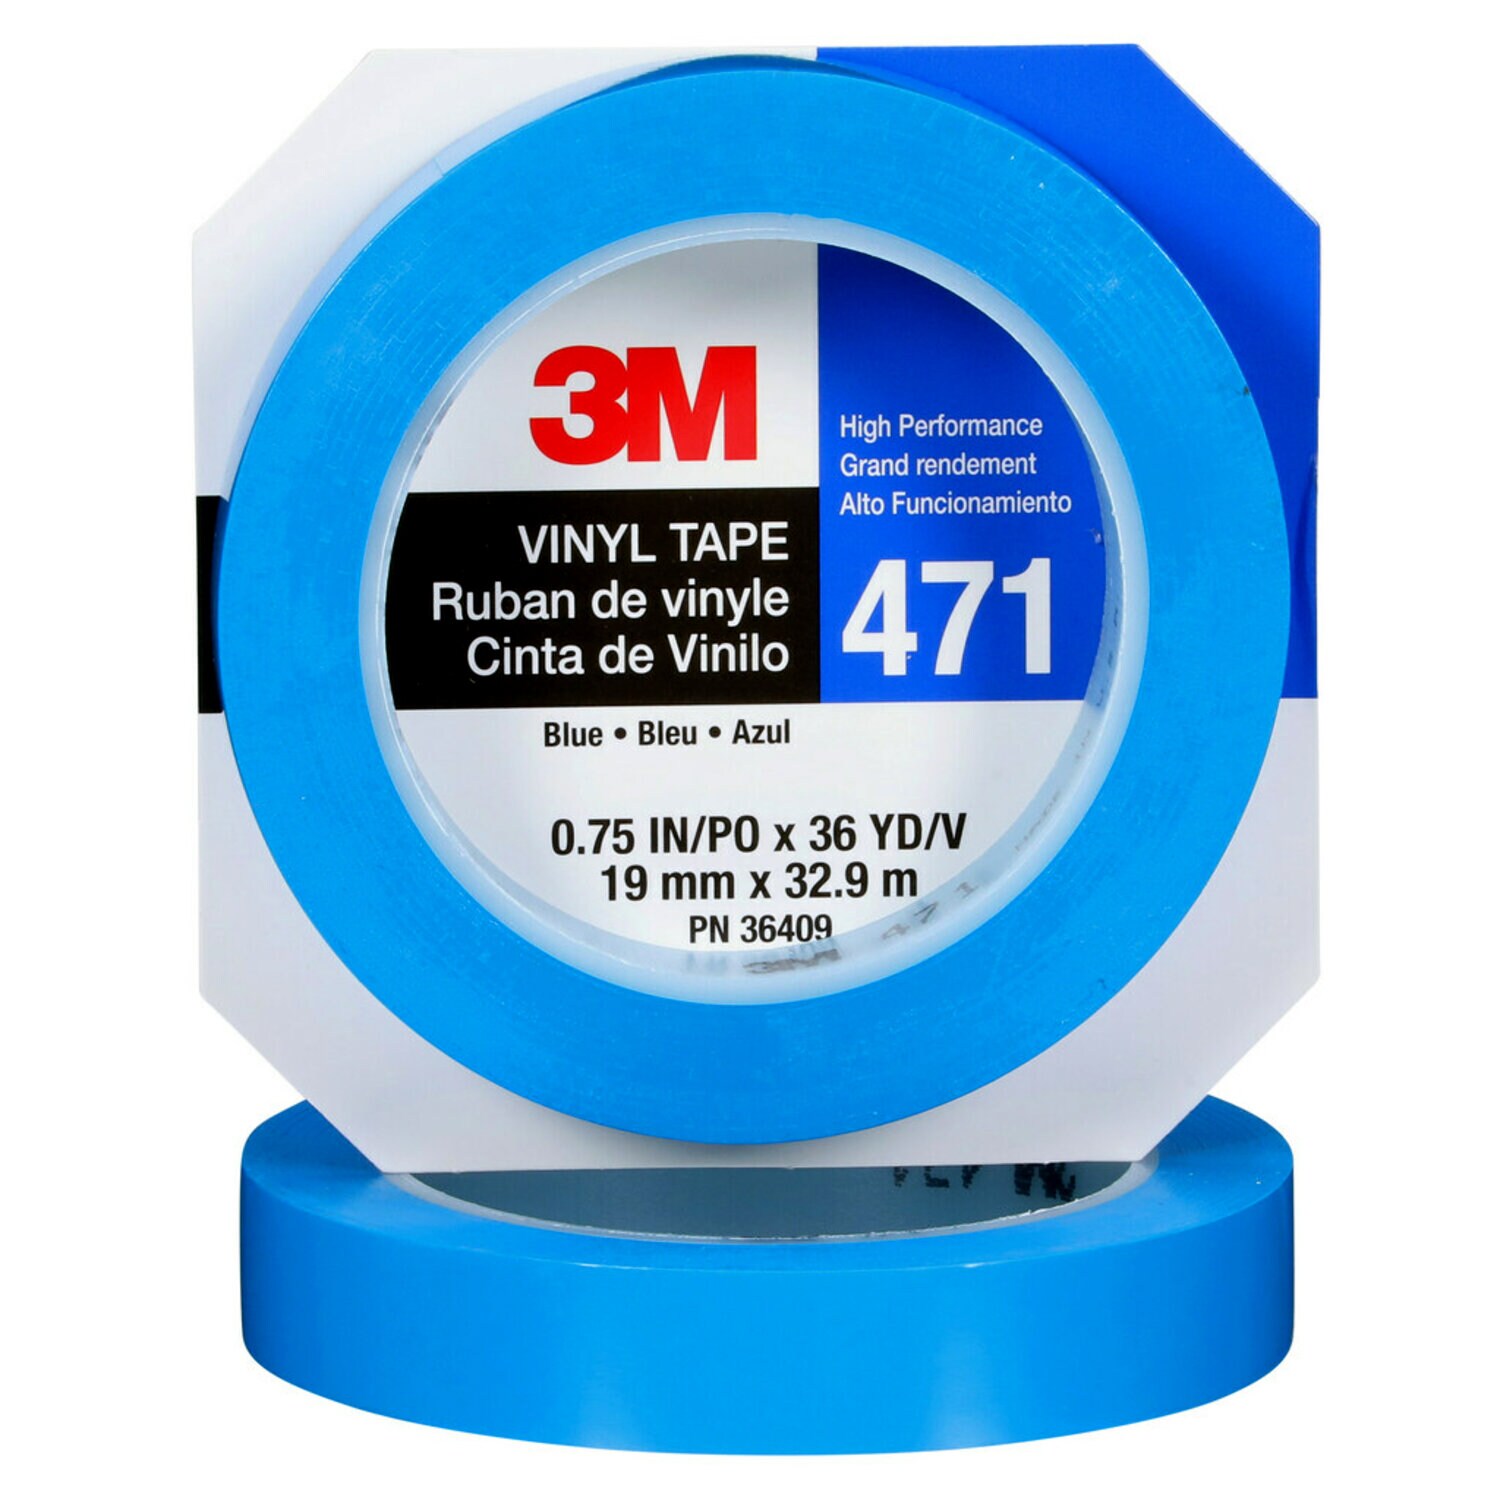 7000124804 - 3M Vinyl Tape 471 Blue PN36409, 3/4 in x 36 yd, 48 individually wrapped
rolls per case Conveniently Packaged